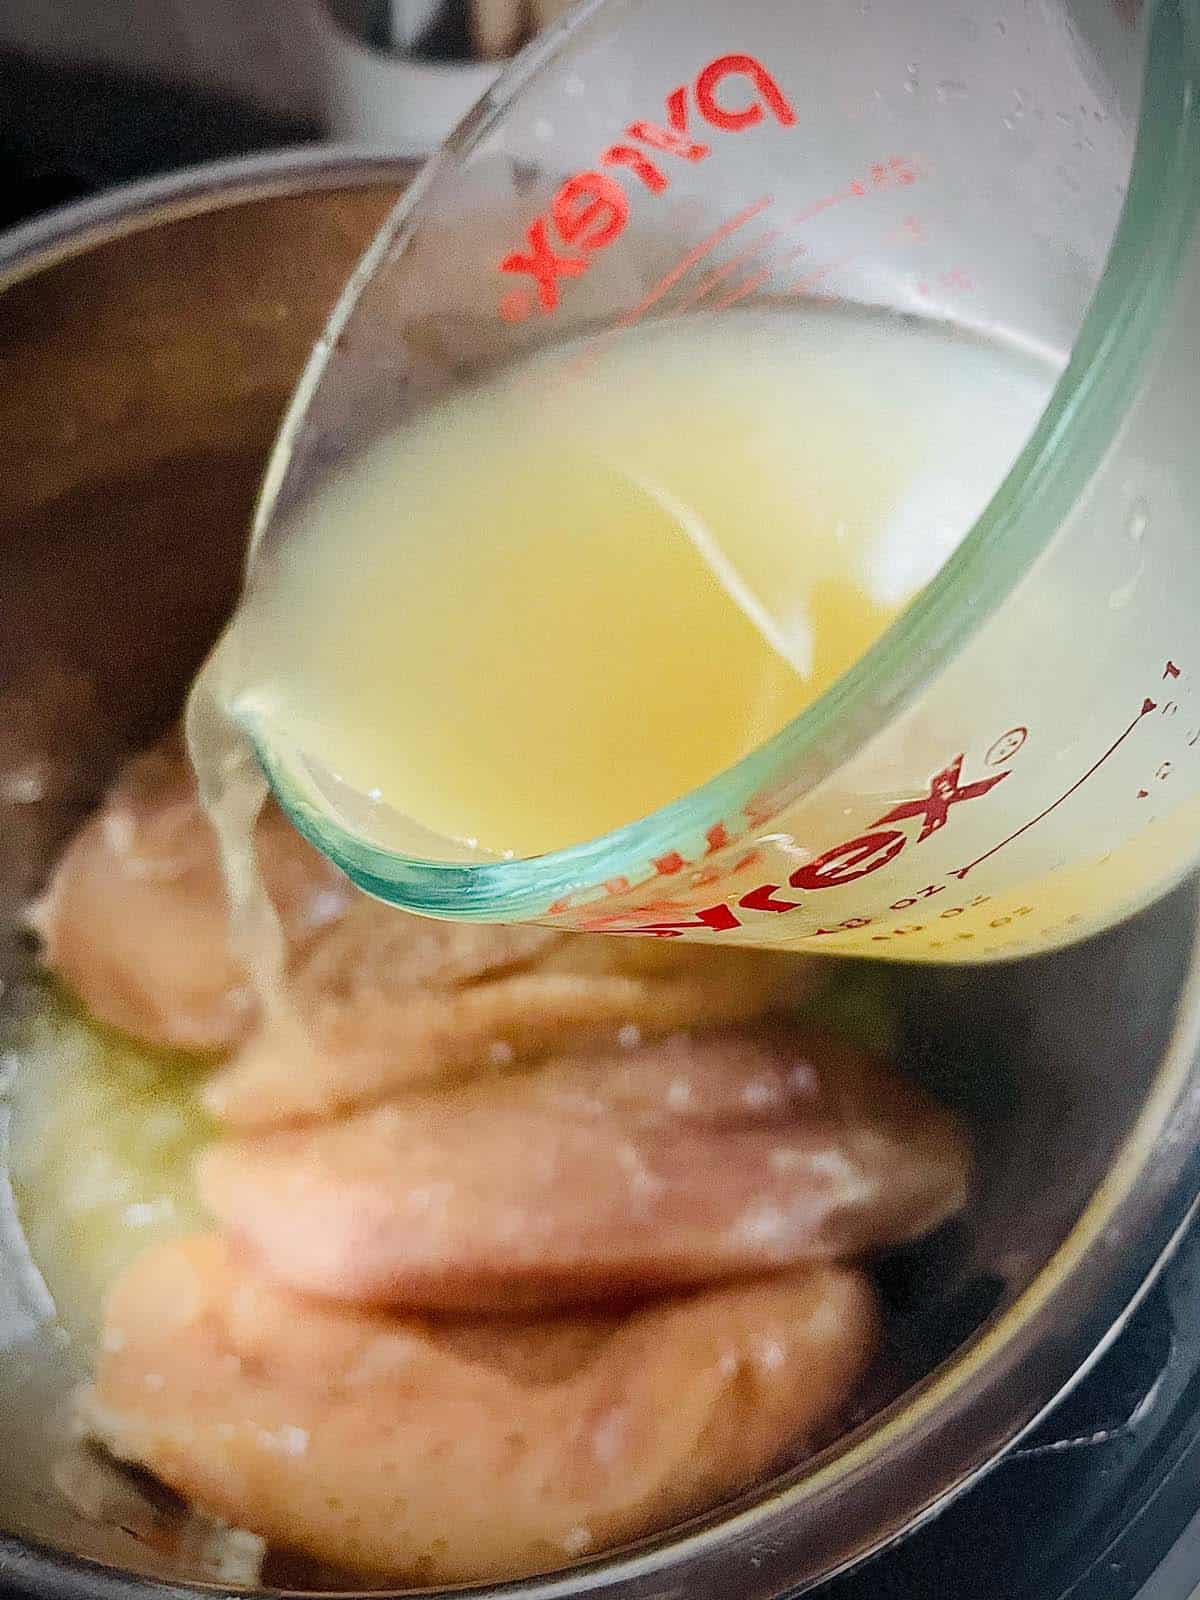 When cooking chicken to freeze, adding a cup of broth to the Instant Pot ensures juicy breasts.